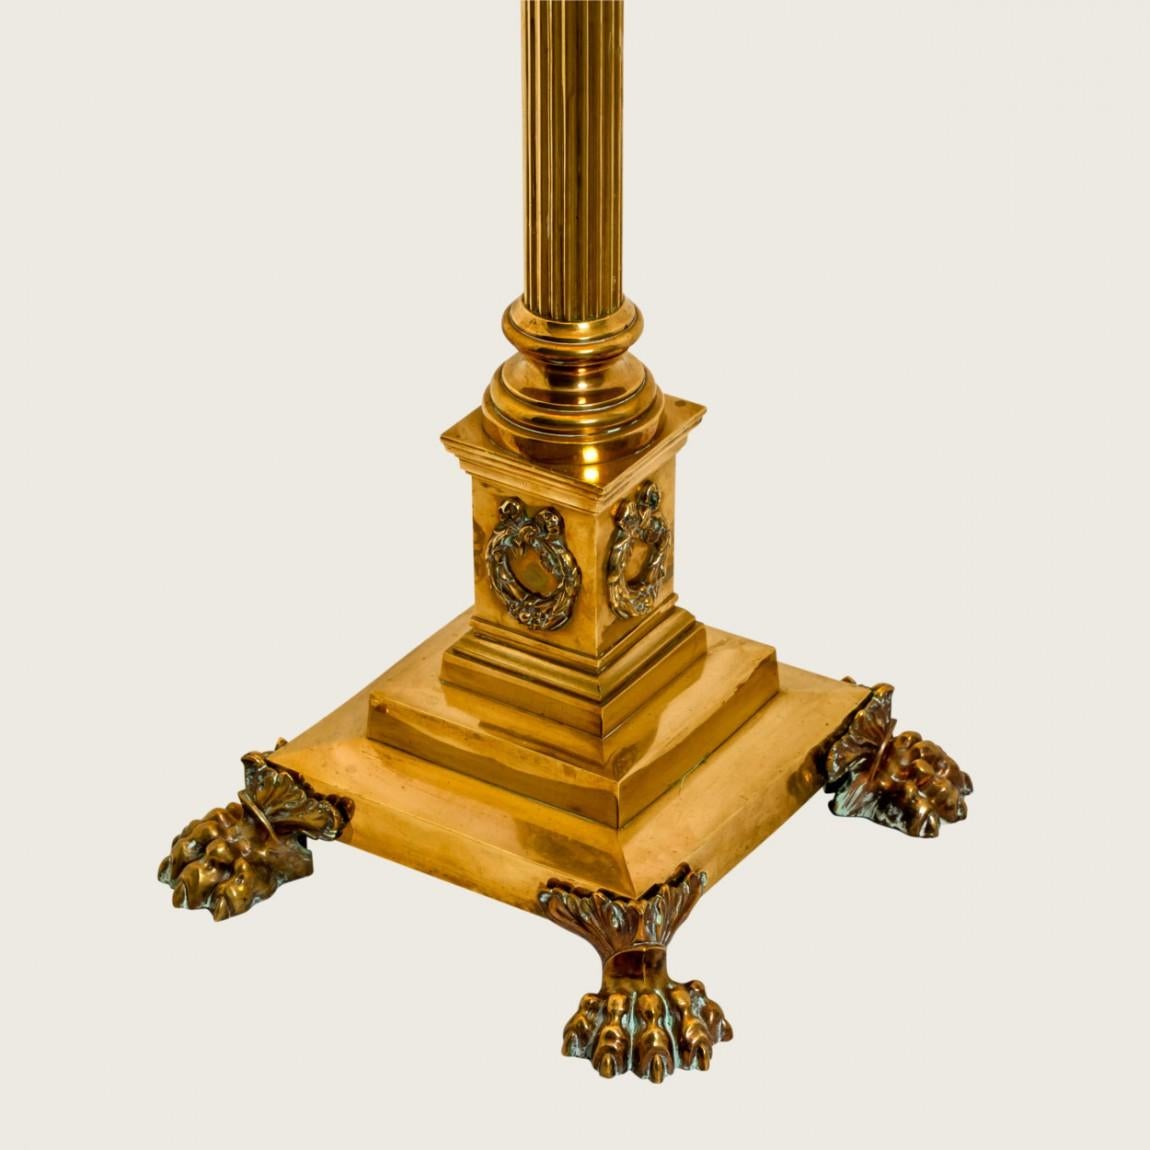 Empire Antique Corinthian Column Brass Floor Lamp with Fringed Lampshade, England, 1890